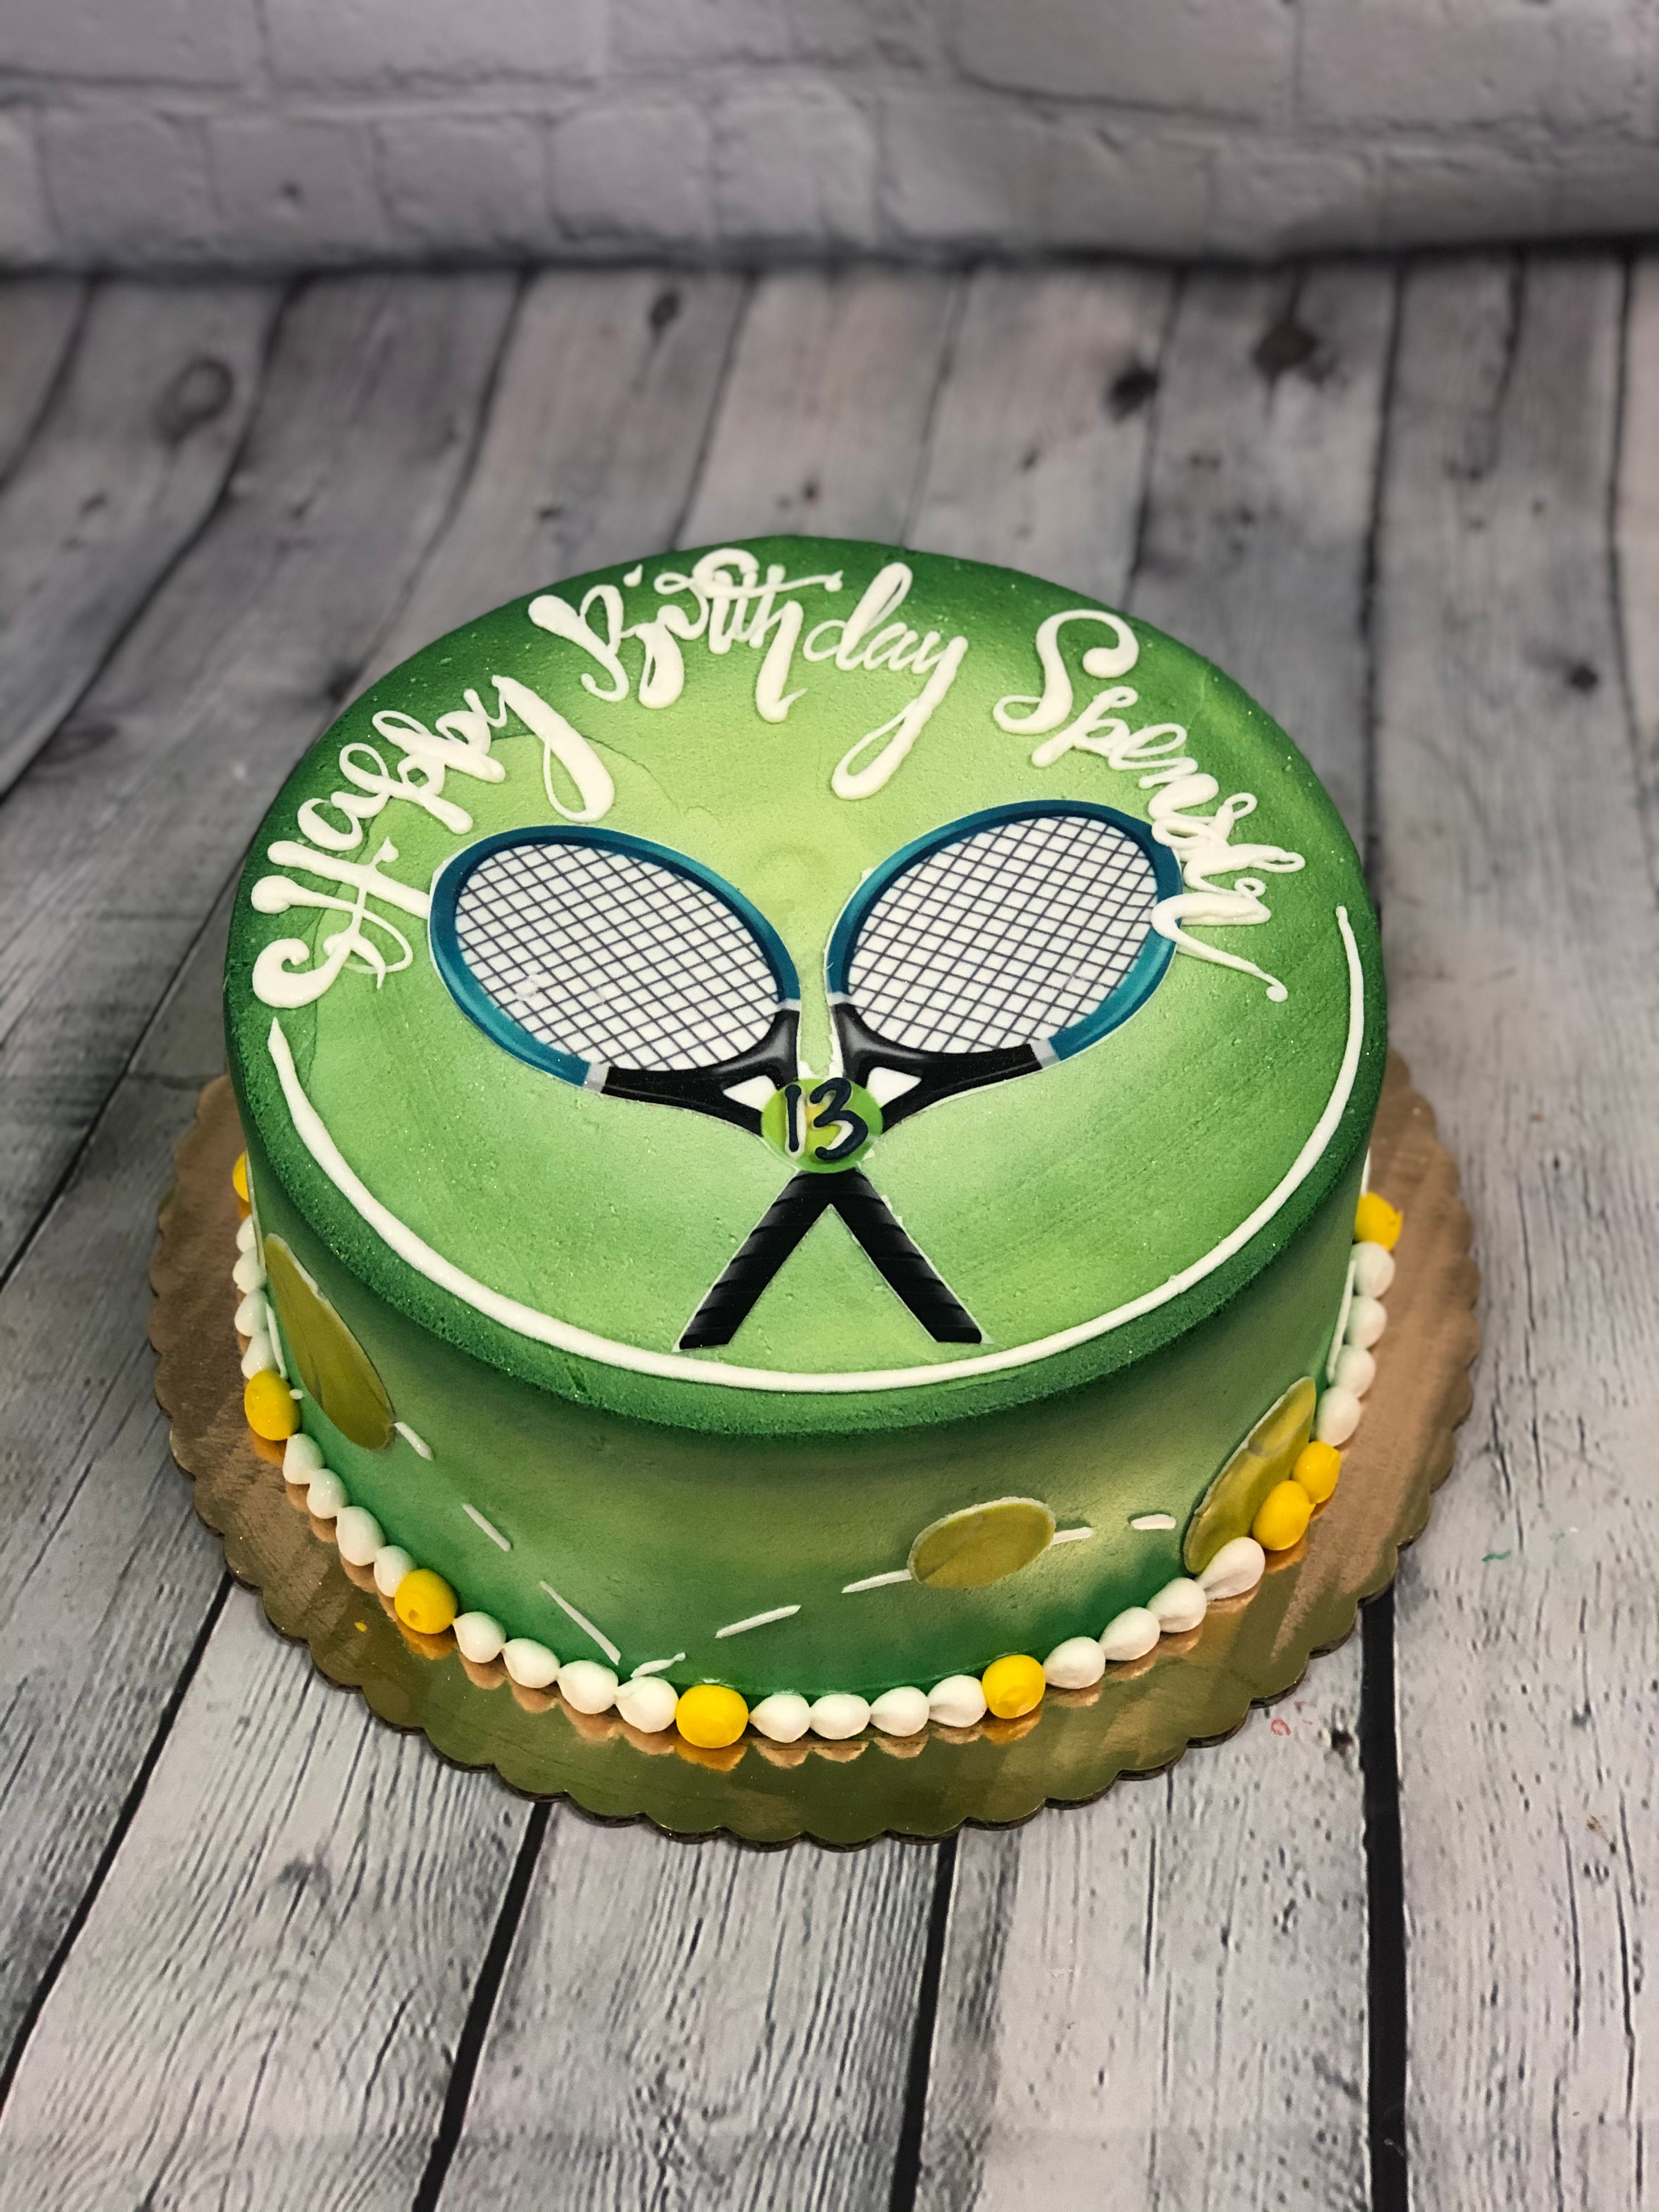 Lorenzo Sonego surprised with a birthday cake after Italian Open 1R win